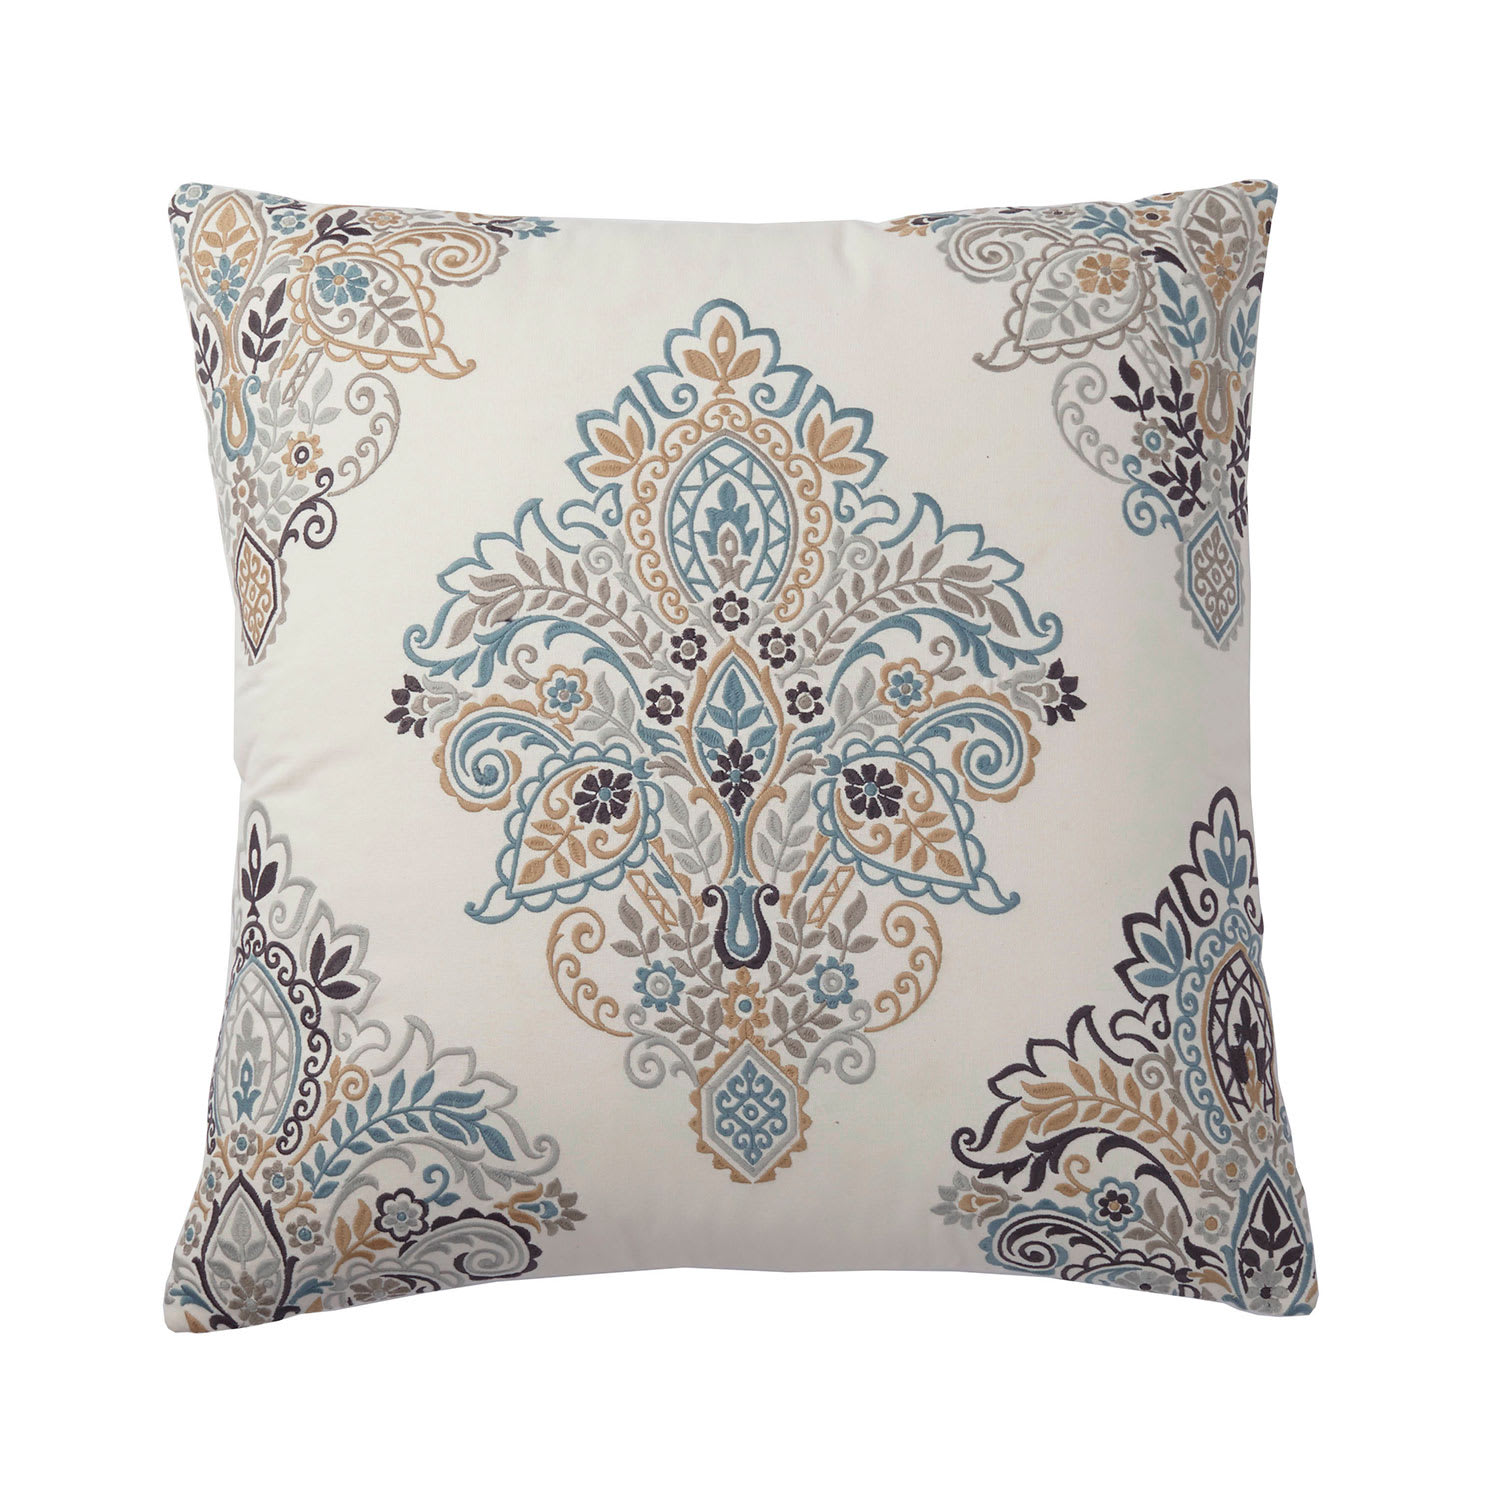 Neutral Paisley Embroidered Pillow Cover - Paisley